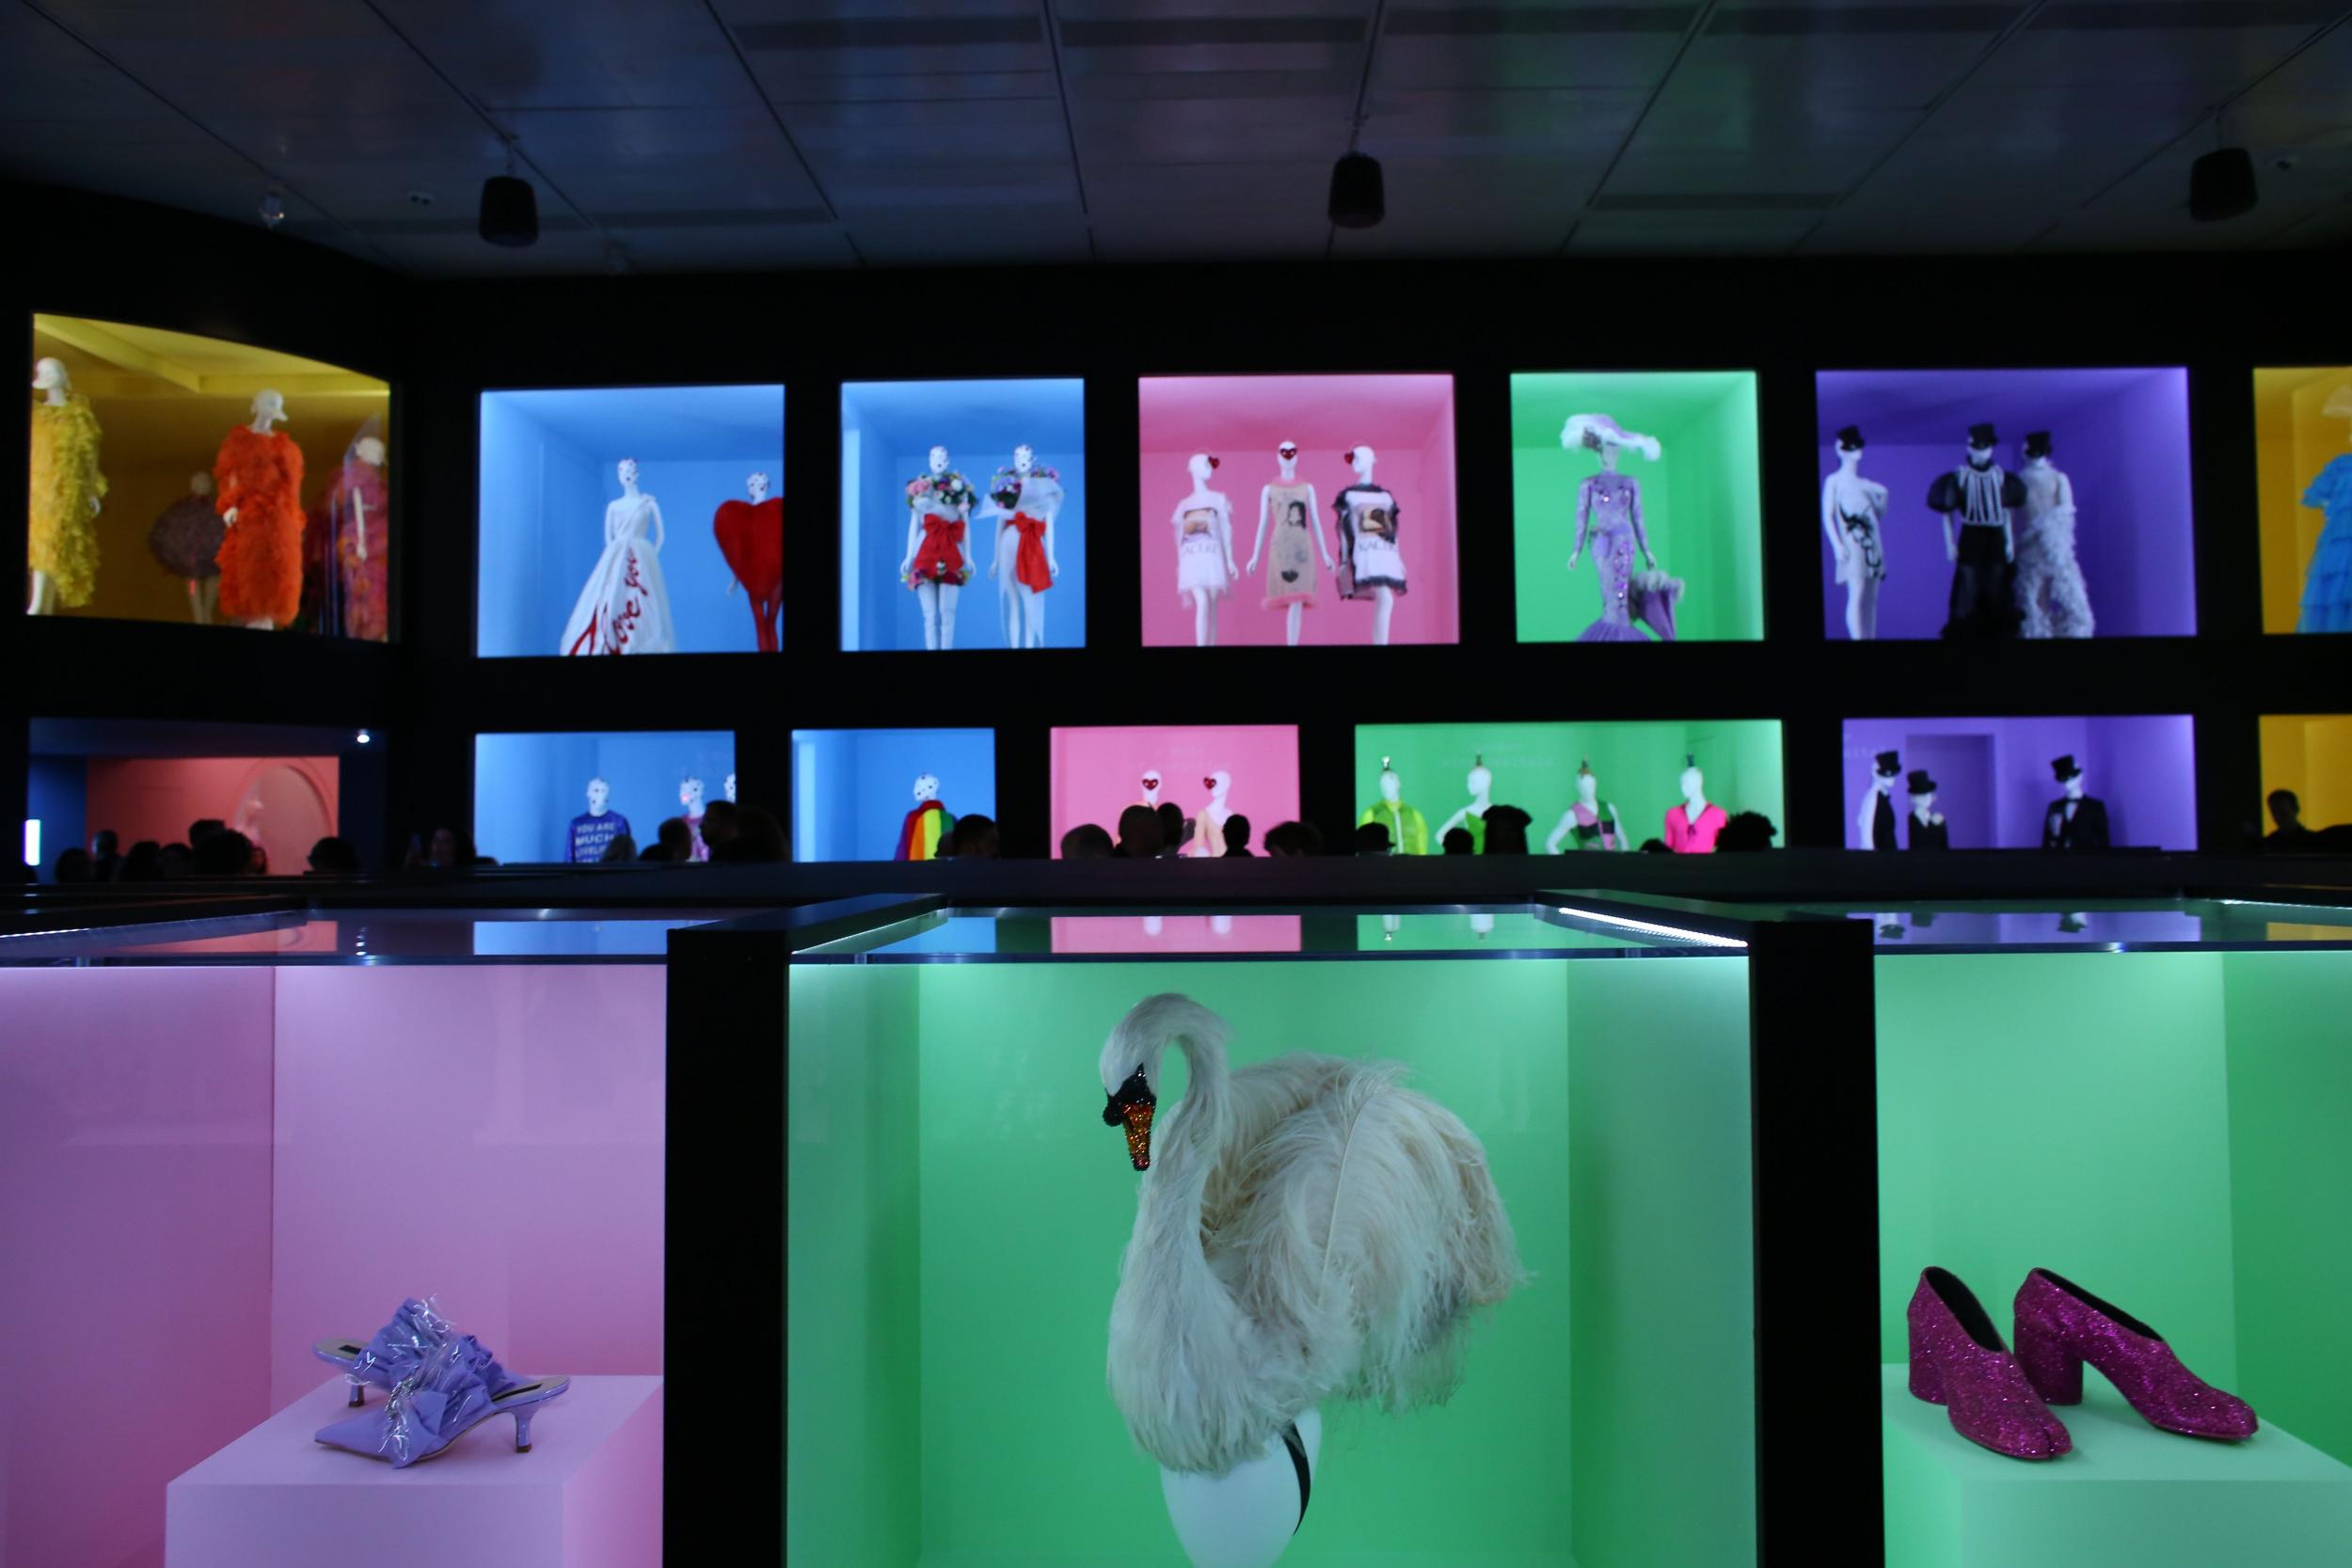 The piece ‘The more feathery romantic ballets’ by Giles Deacon (center) is on display at Camp: Notes on Fashion.